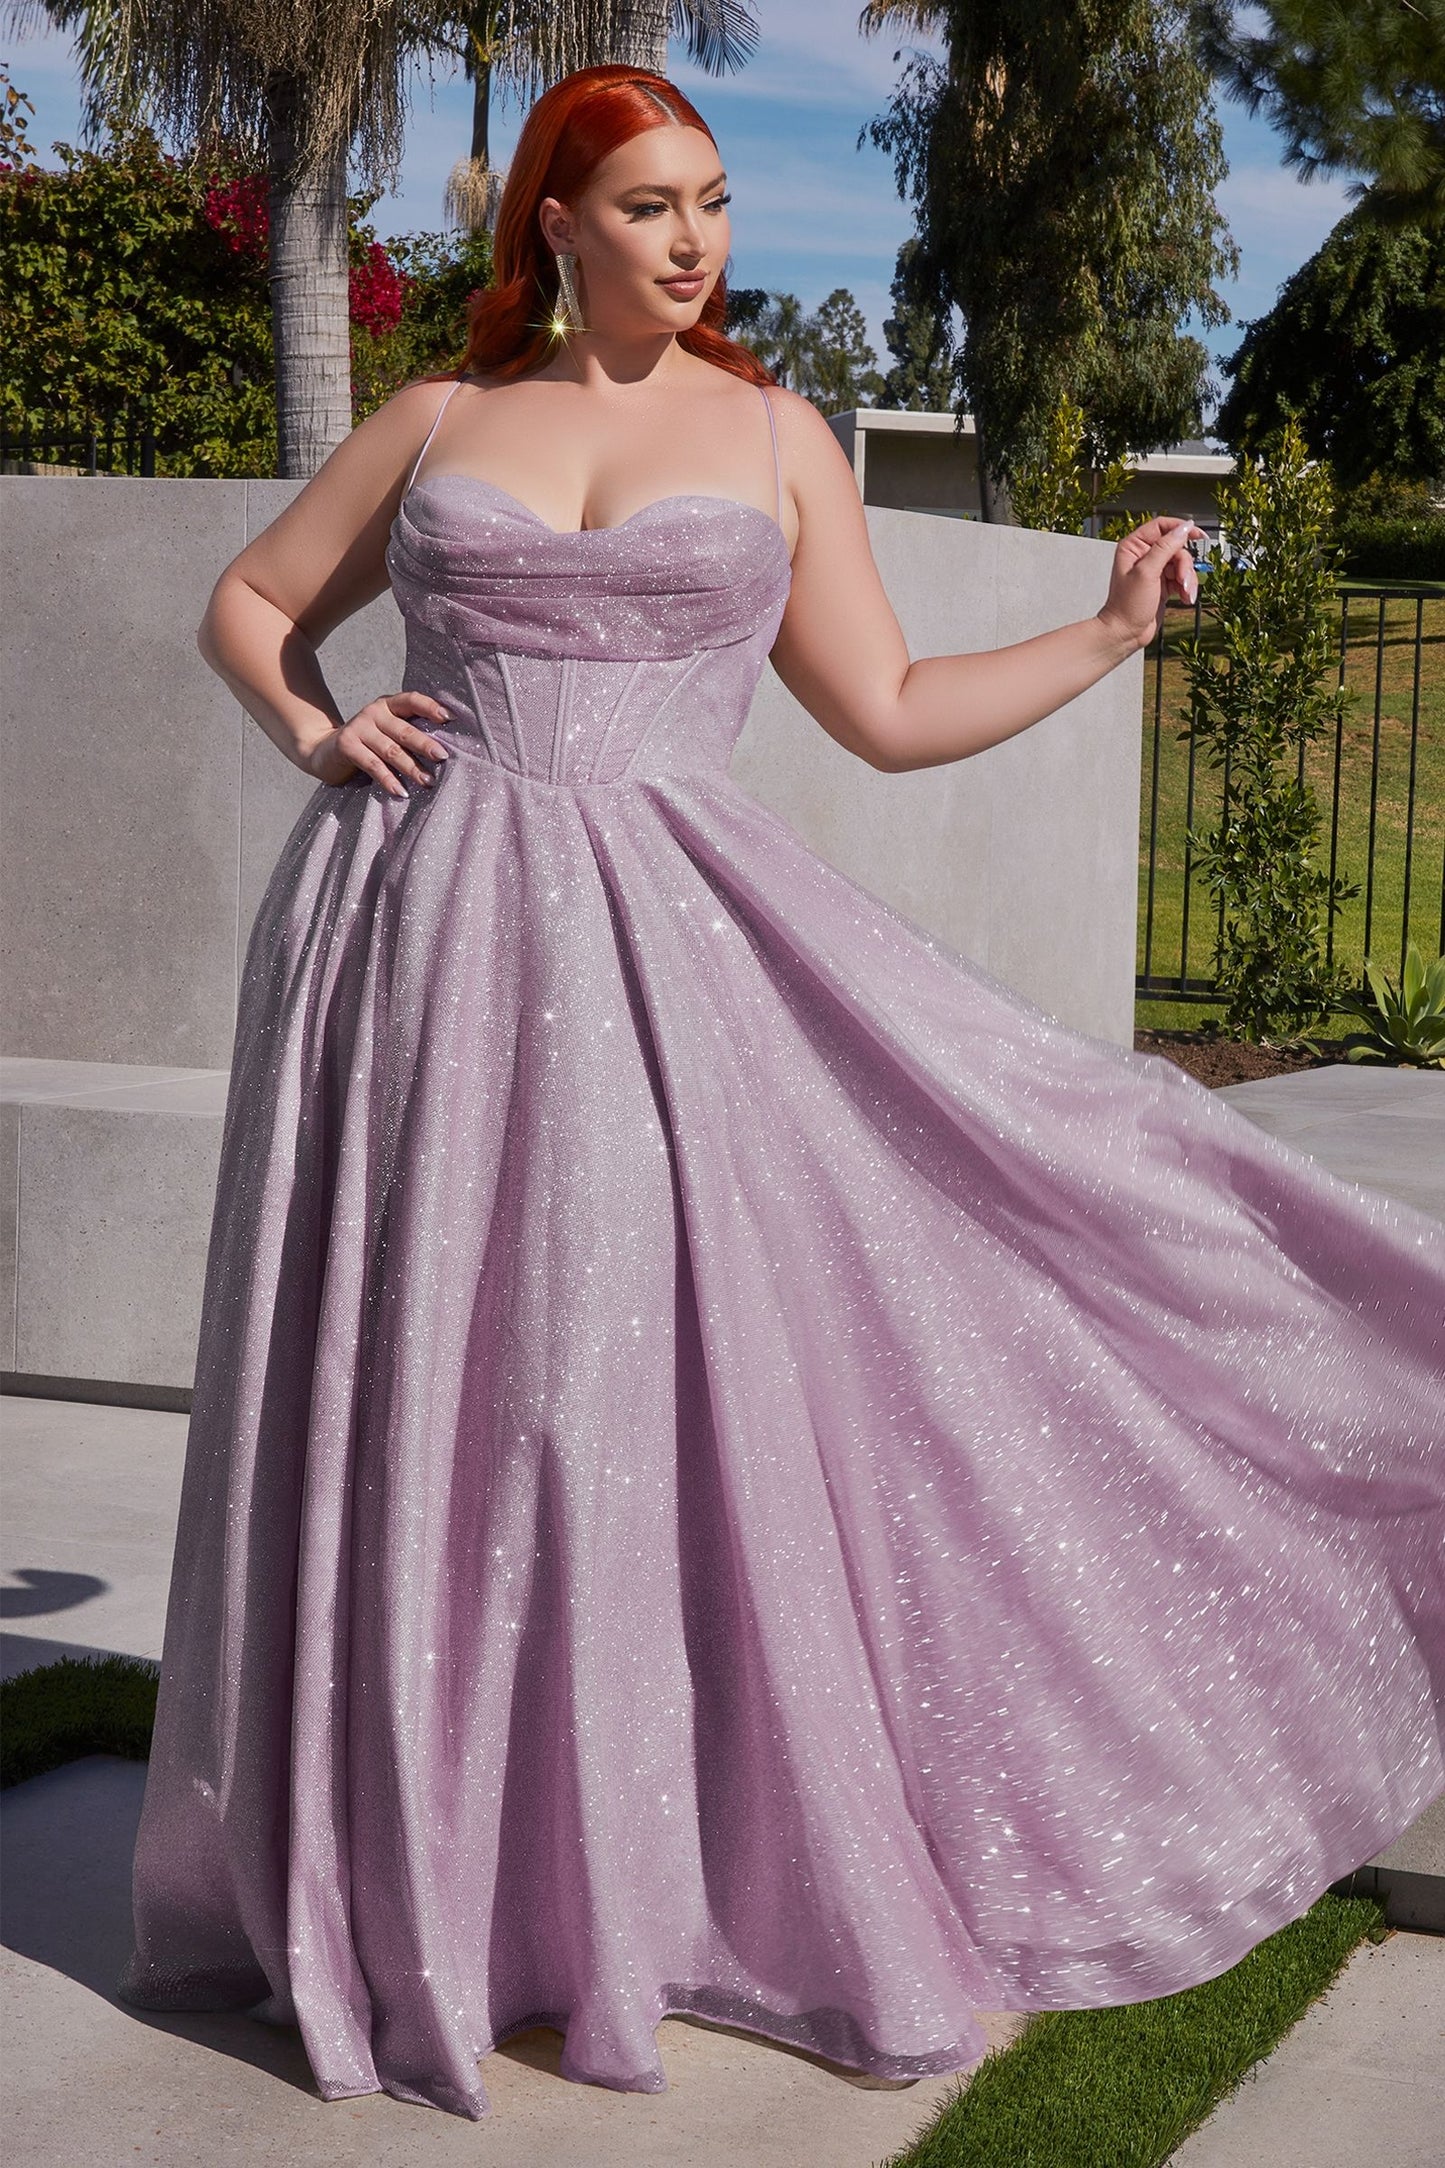 Flattering Cowl Neckline of Glamour Glitter Gown Plus Size